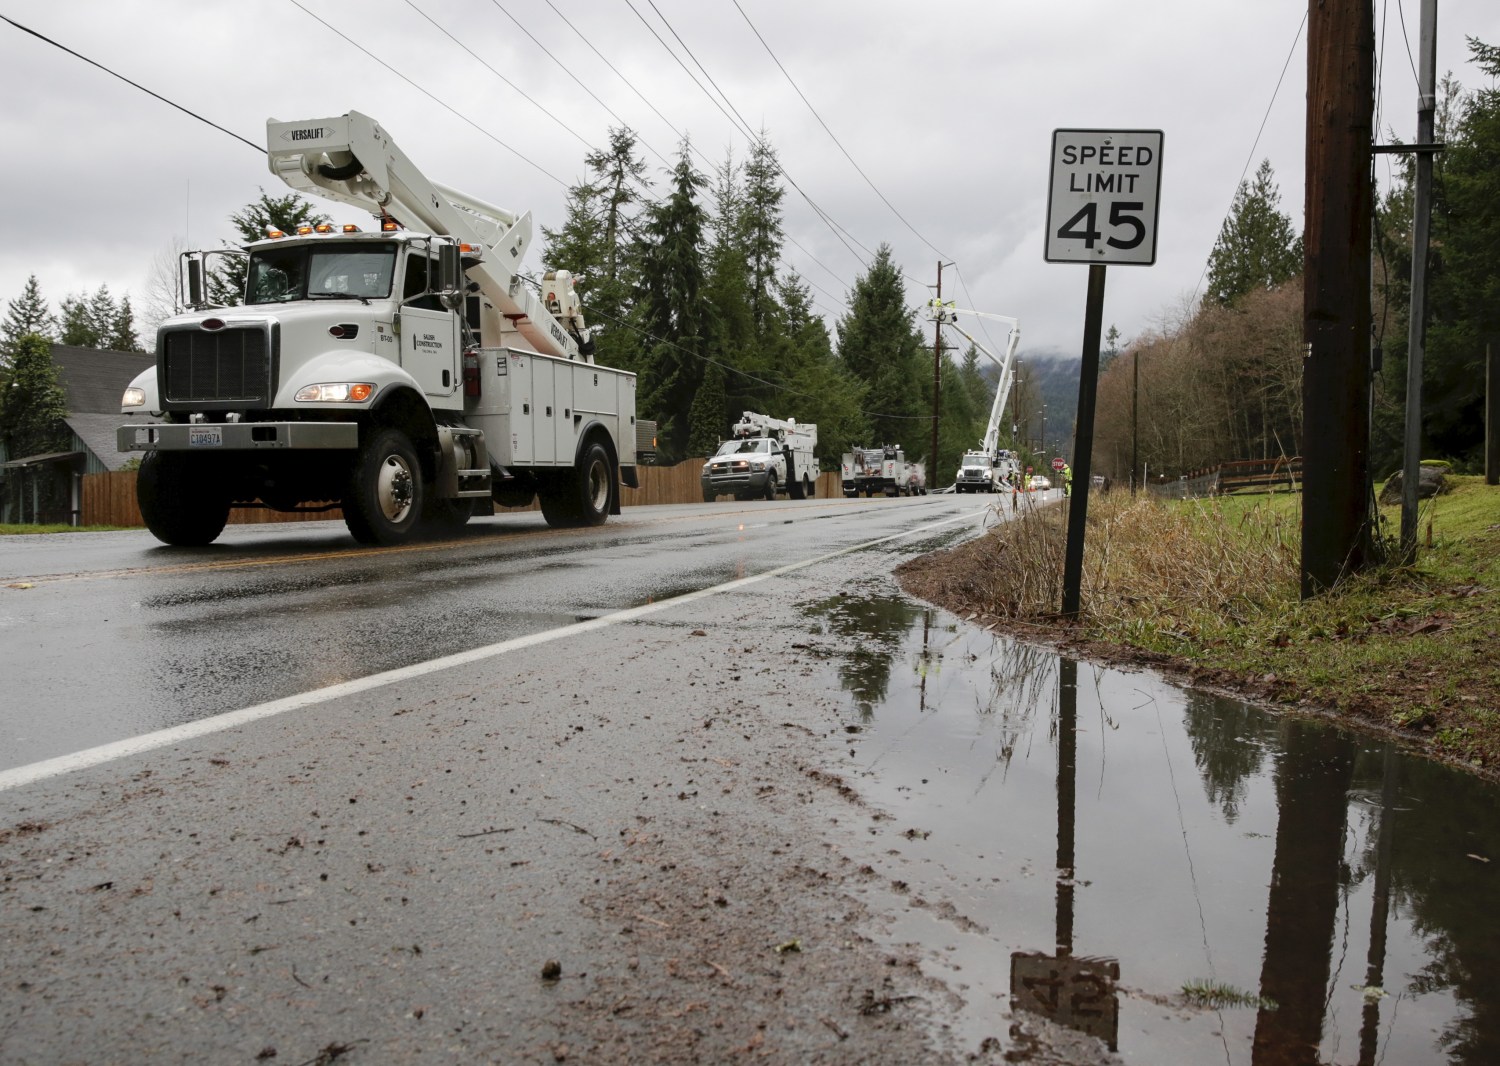 Utility trucks are pictured along Issaquah-Hobart Road Southeast as crews work to restore power lines in Issaquah, Washington December 10, 2015. Residents of the U.S. Pacific Northwest were hit by fresh storms on Thursday after the region received record-breaking rainfall that left two dead in Oregon and triggered widespread flooding, landslides, road closures and power cuts. REUTERS/Jason Redmond